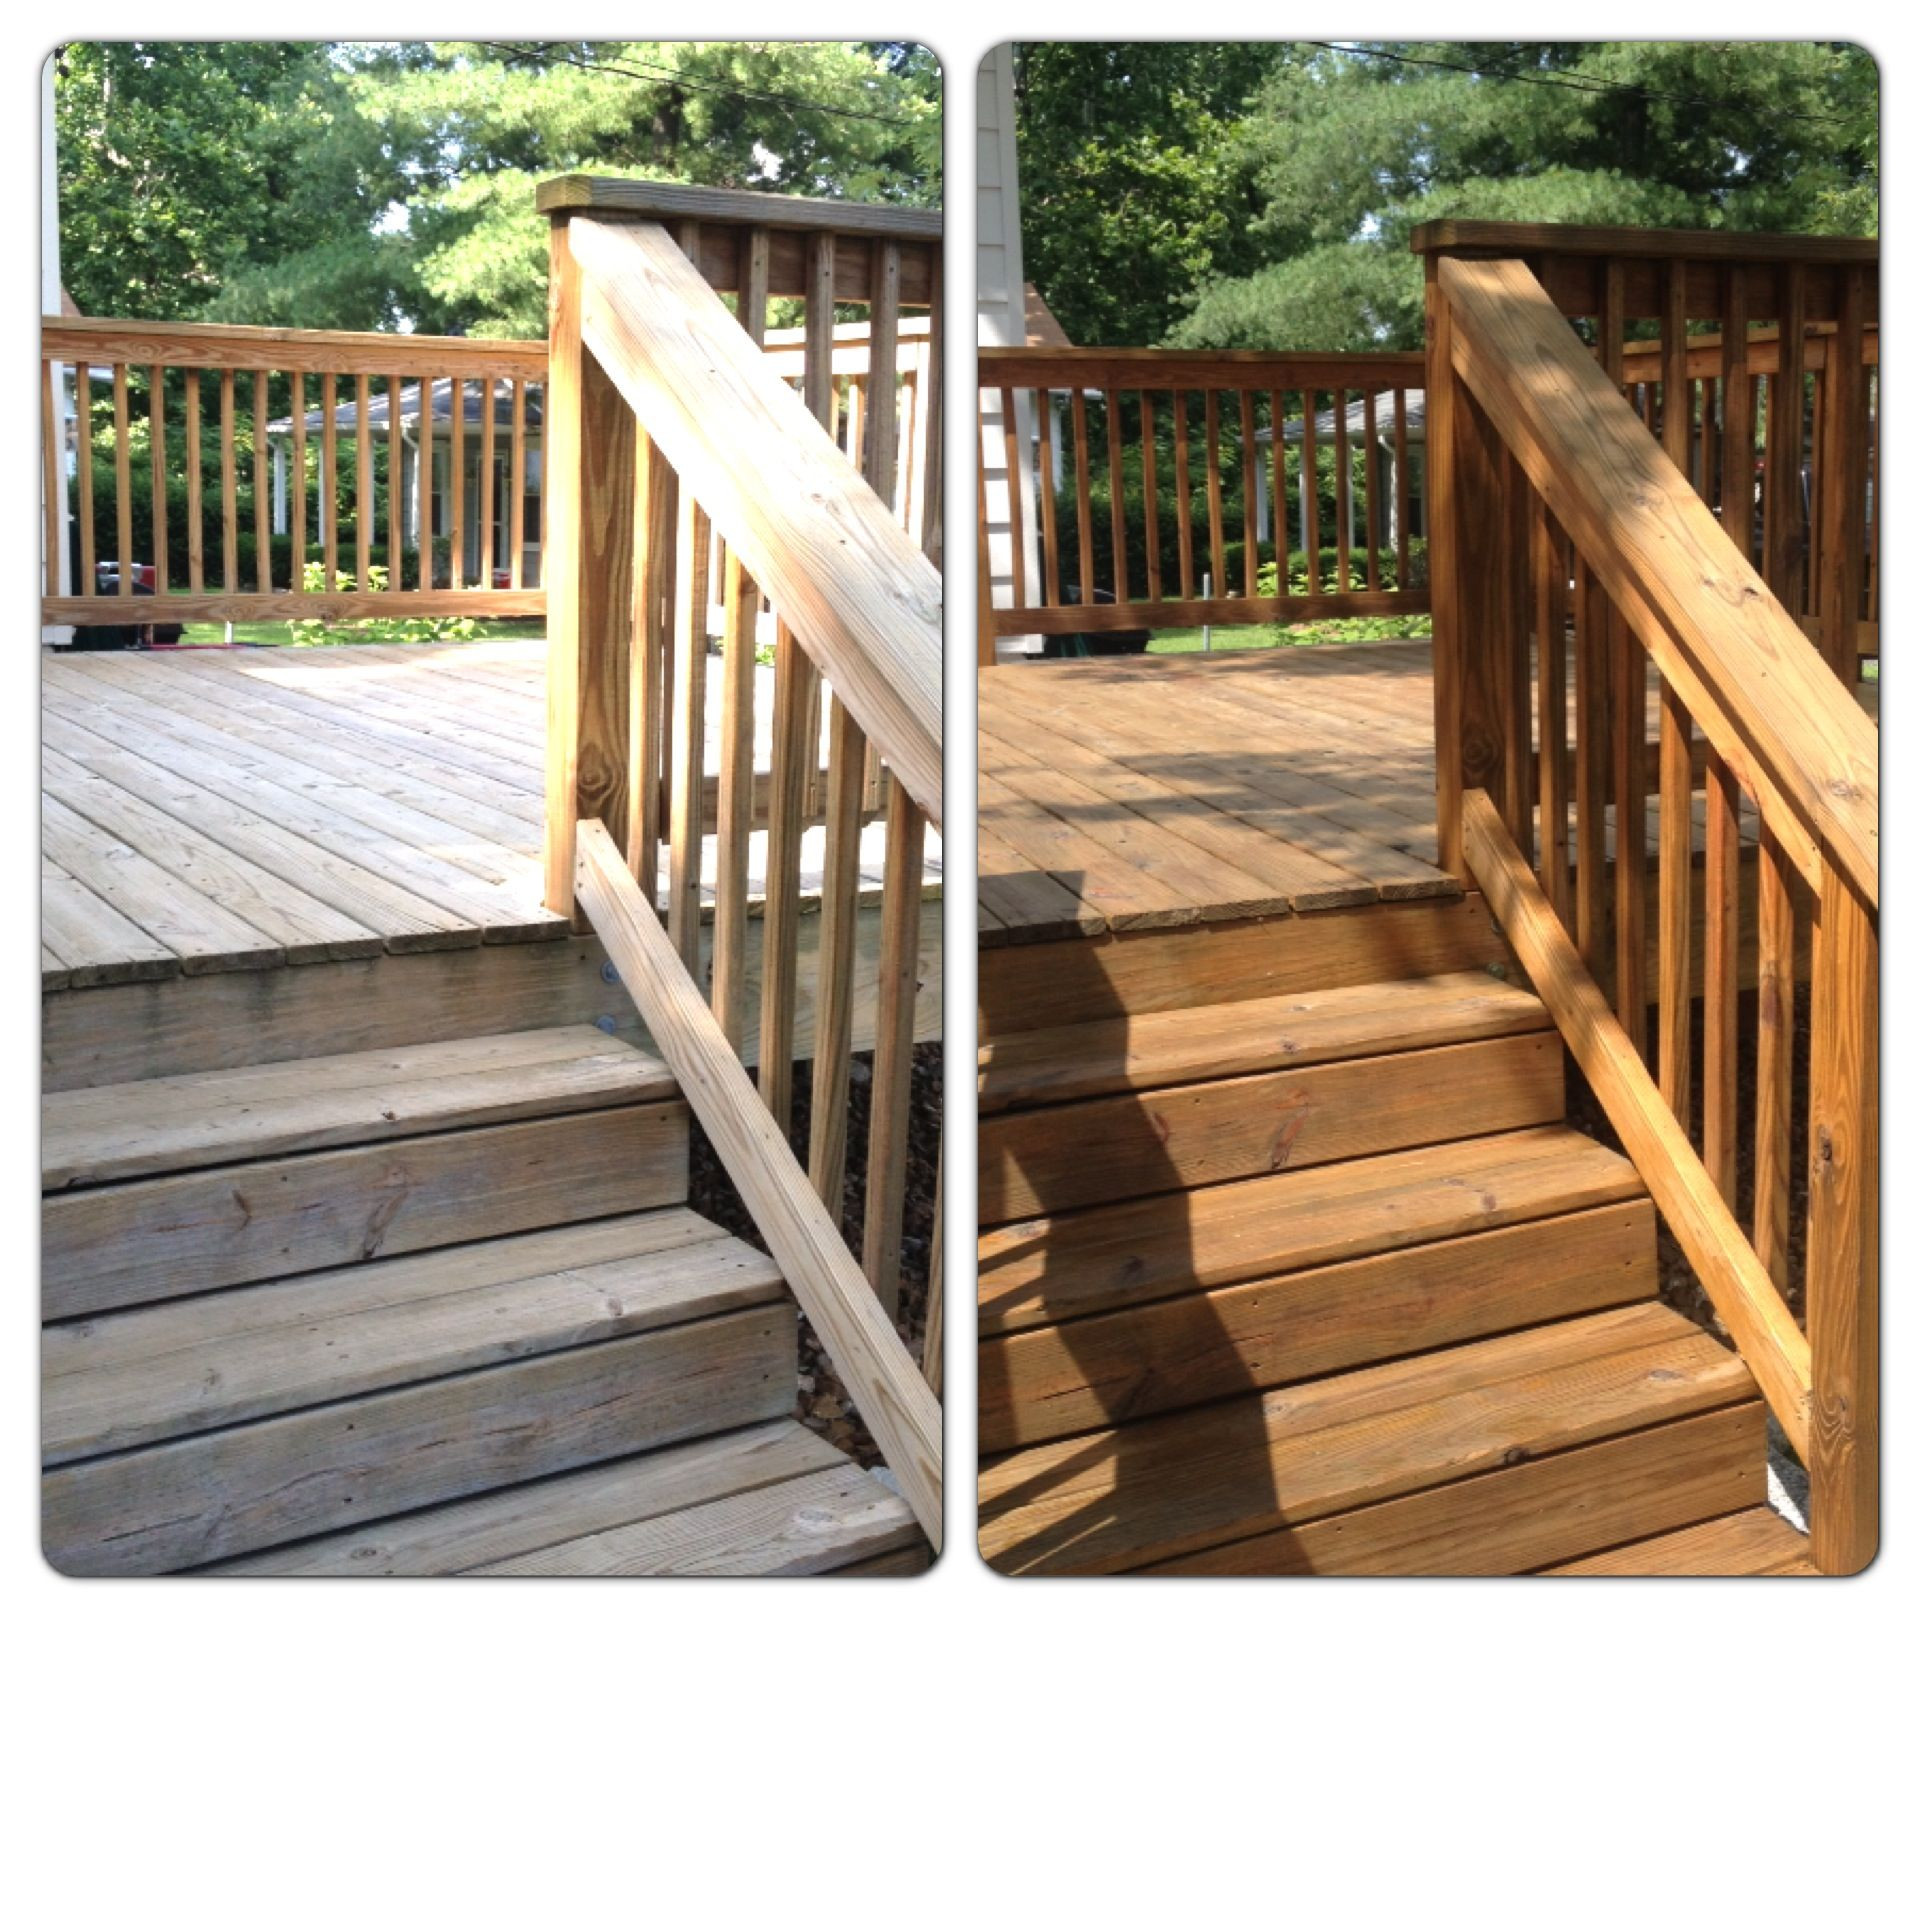 Sherwin Williams Deck Paint Reviews
 Sherwin Williams Deckscapes cedar oil based deck stain